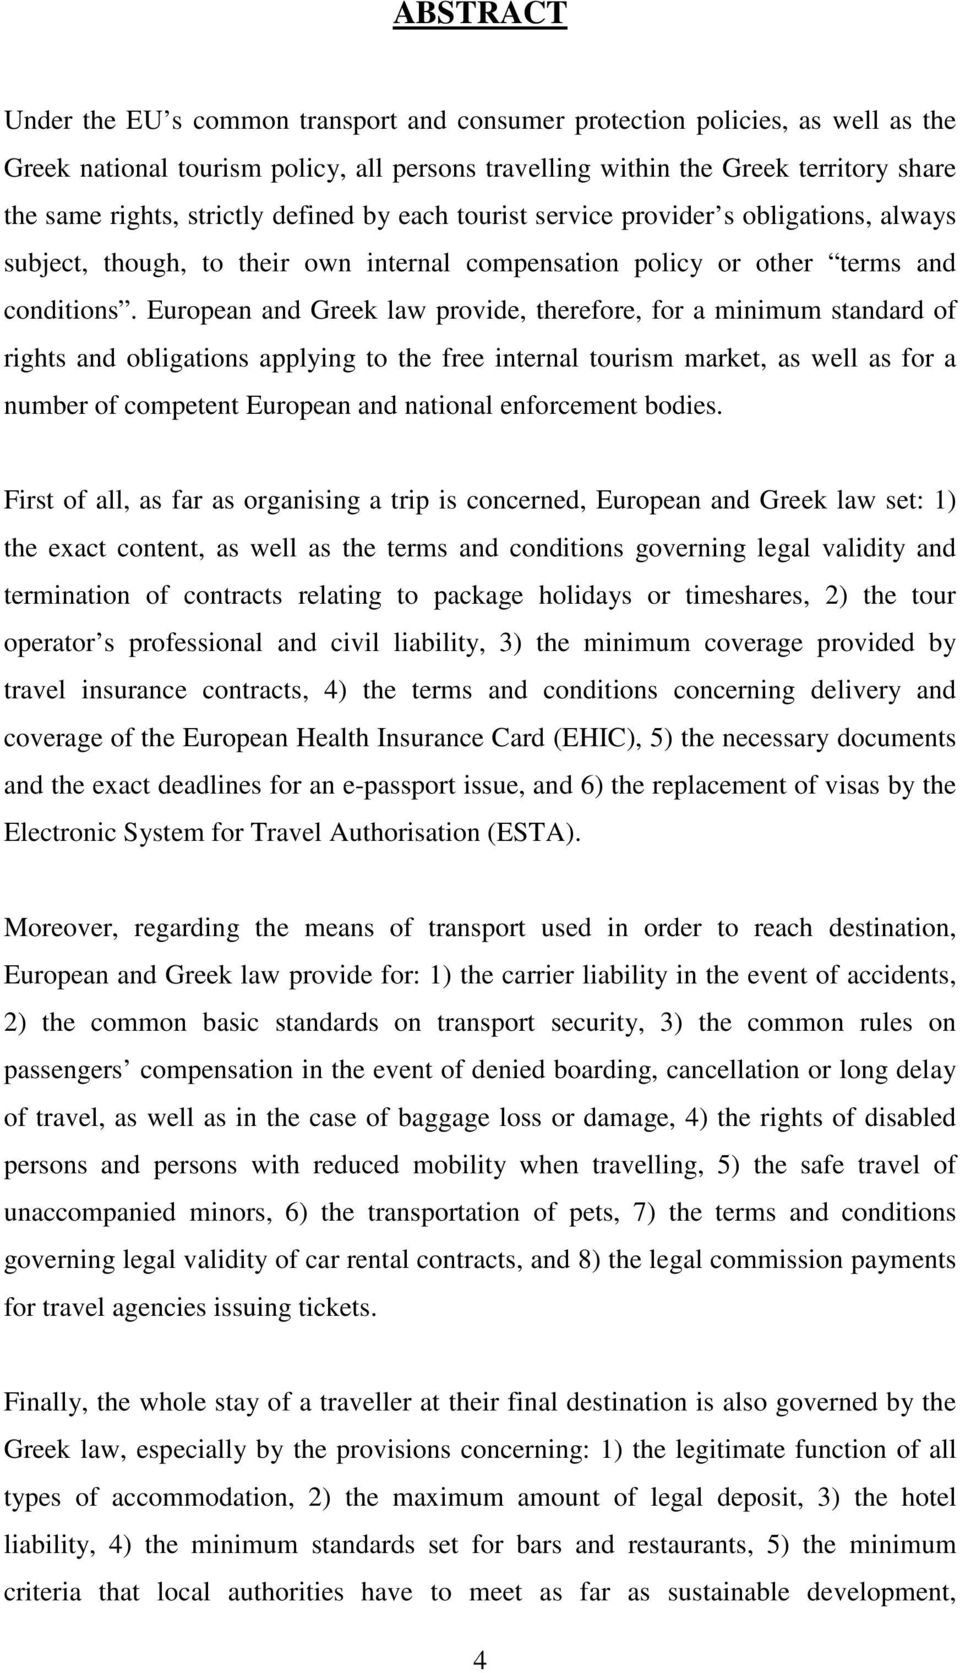 European and Greek law provide, therefore, for a minimum standard of rights and obligations applying to the free internal tourism market, as well as for a number of competent European and national